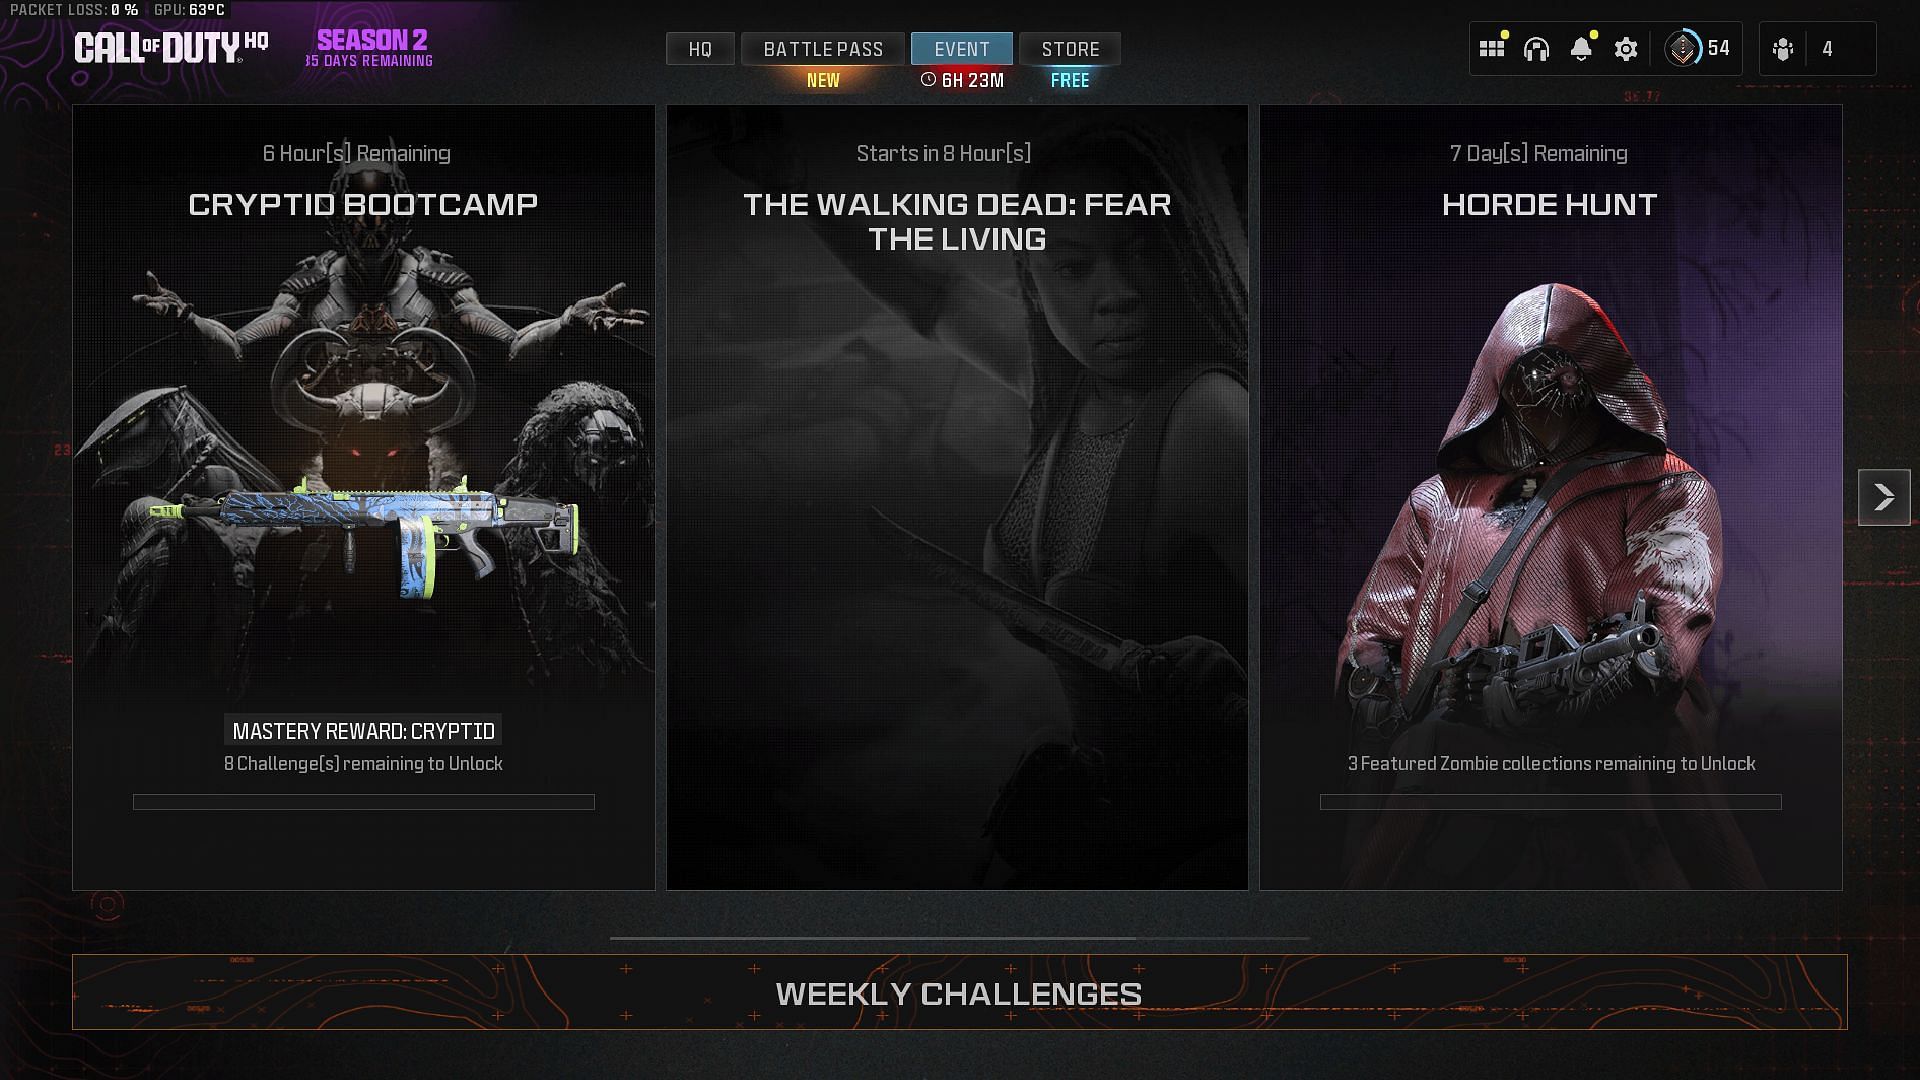 The Walking Dead Fear the Living event tab (Image via Activision)